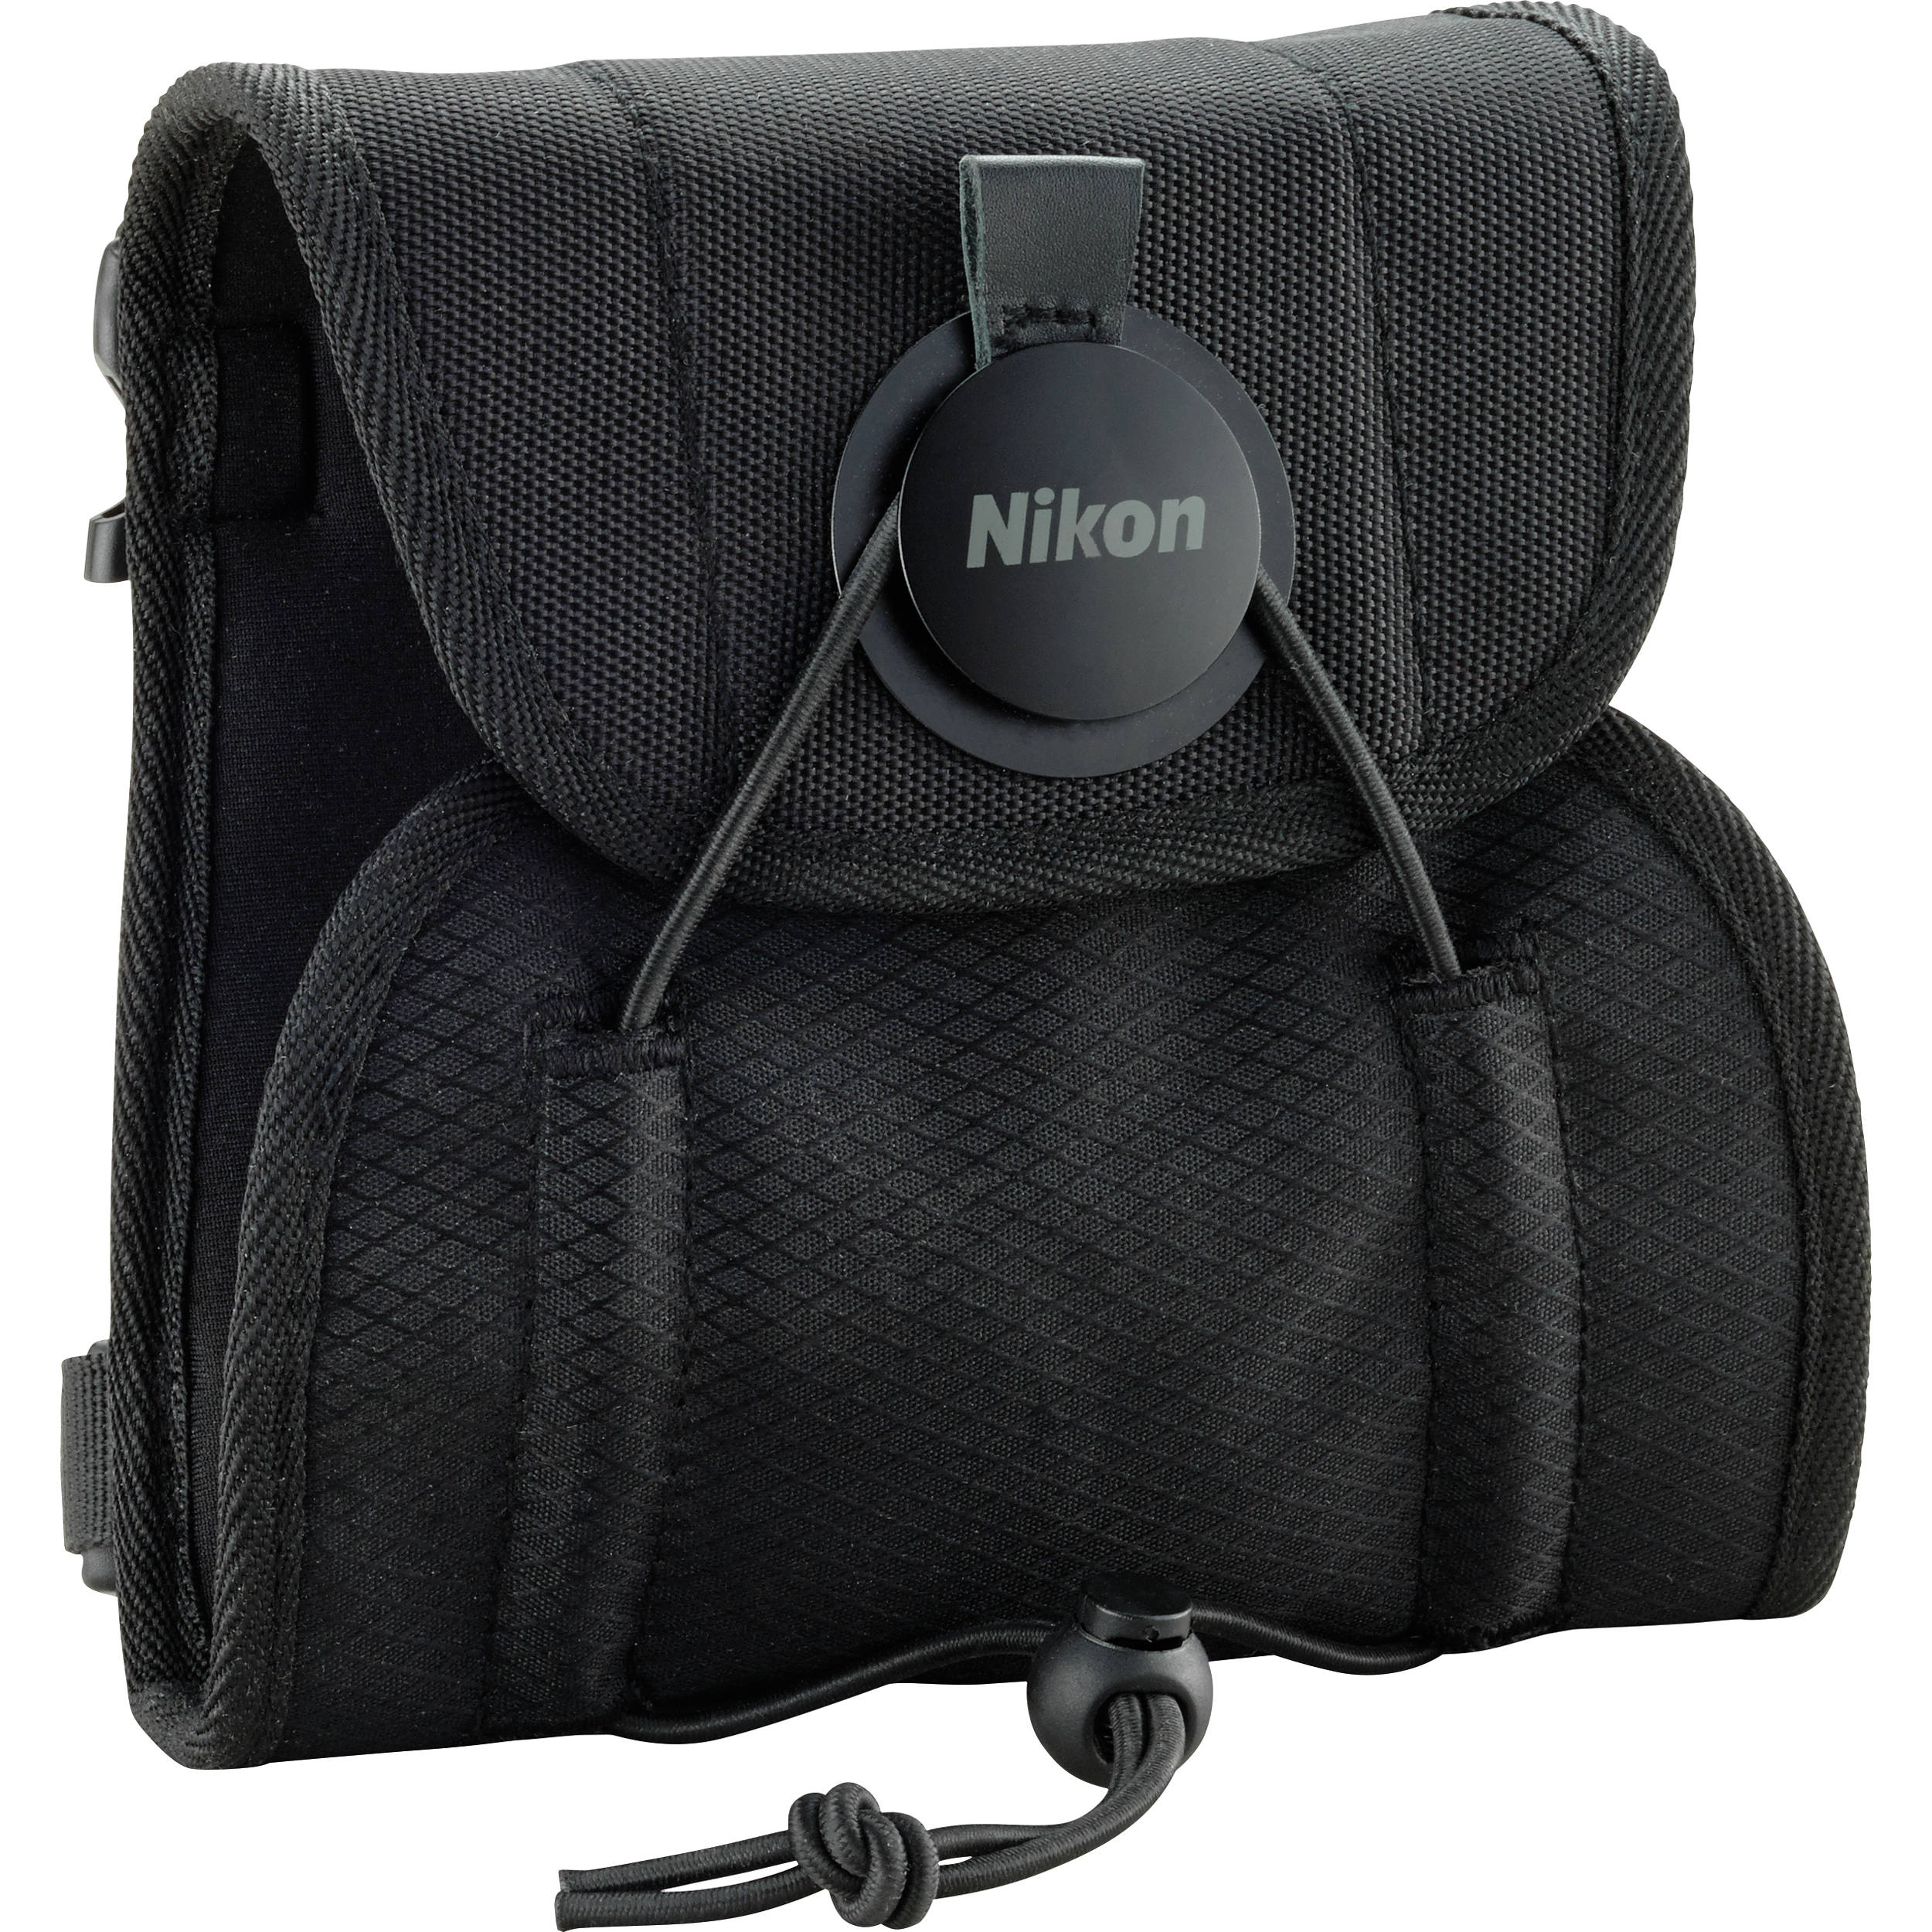 Allen Binocular Strap Harness With Universal Protective Case Pouch Cover Black